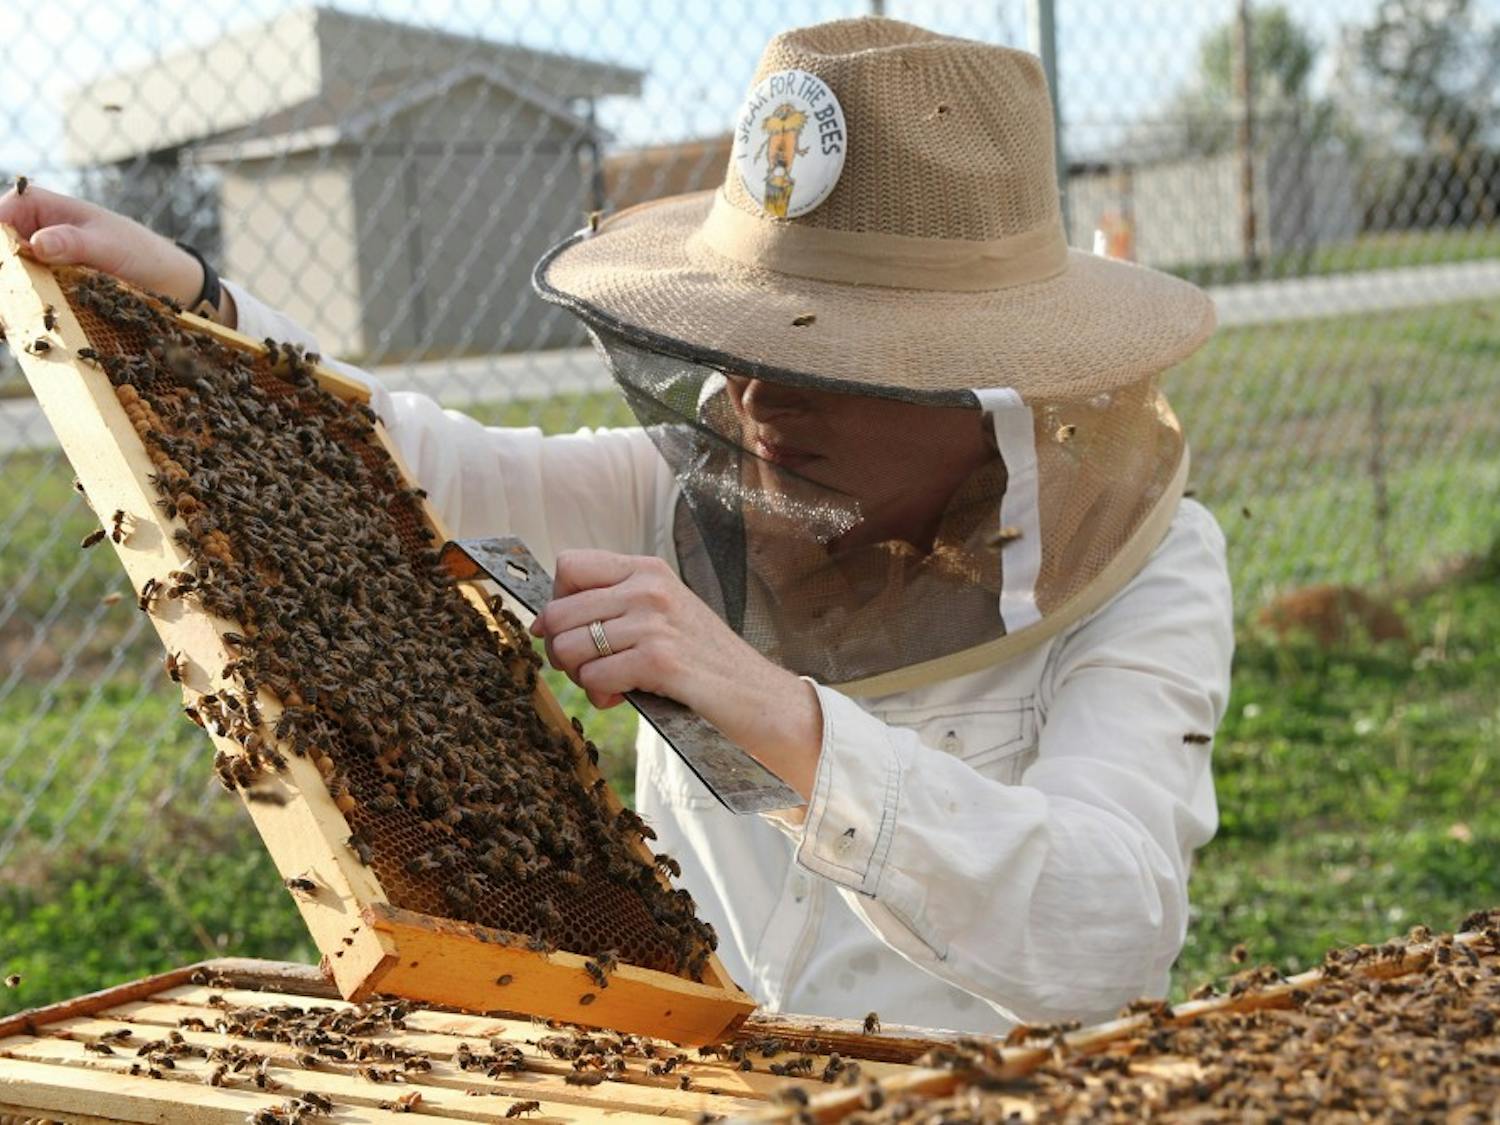 Auburn  University  Bee  Lab  research  technician  Emily  Muehlenfeld  examines  honey  bees  in  a&nbsp;bee  hive.  The  nation’s  beekeepers  lost  40  percent  of  their  managed  honey  bee  colonies  between&nbsp;April  1,  2017,  and  March  31,  2018,  an  increase  of  almost  7  percentage  points  from  the  previous&nbsp;year’s  total  loss  rate.